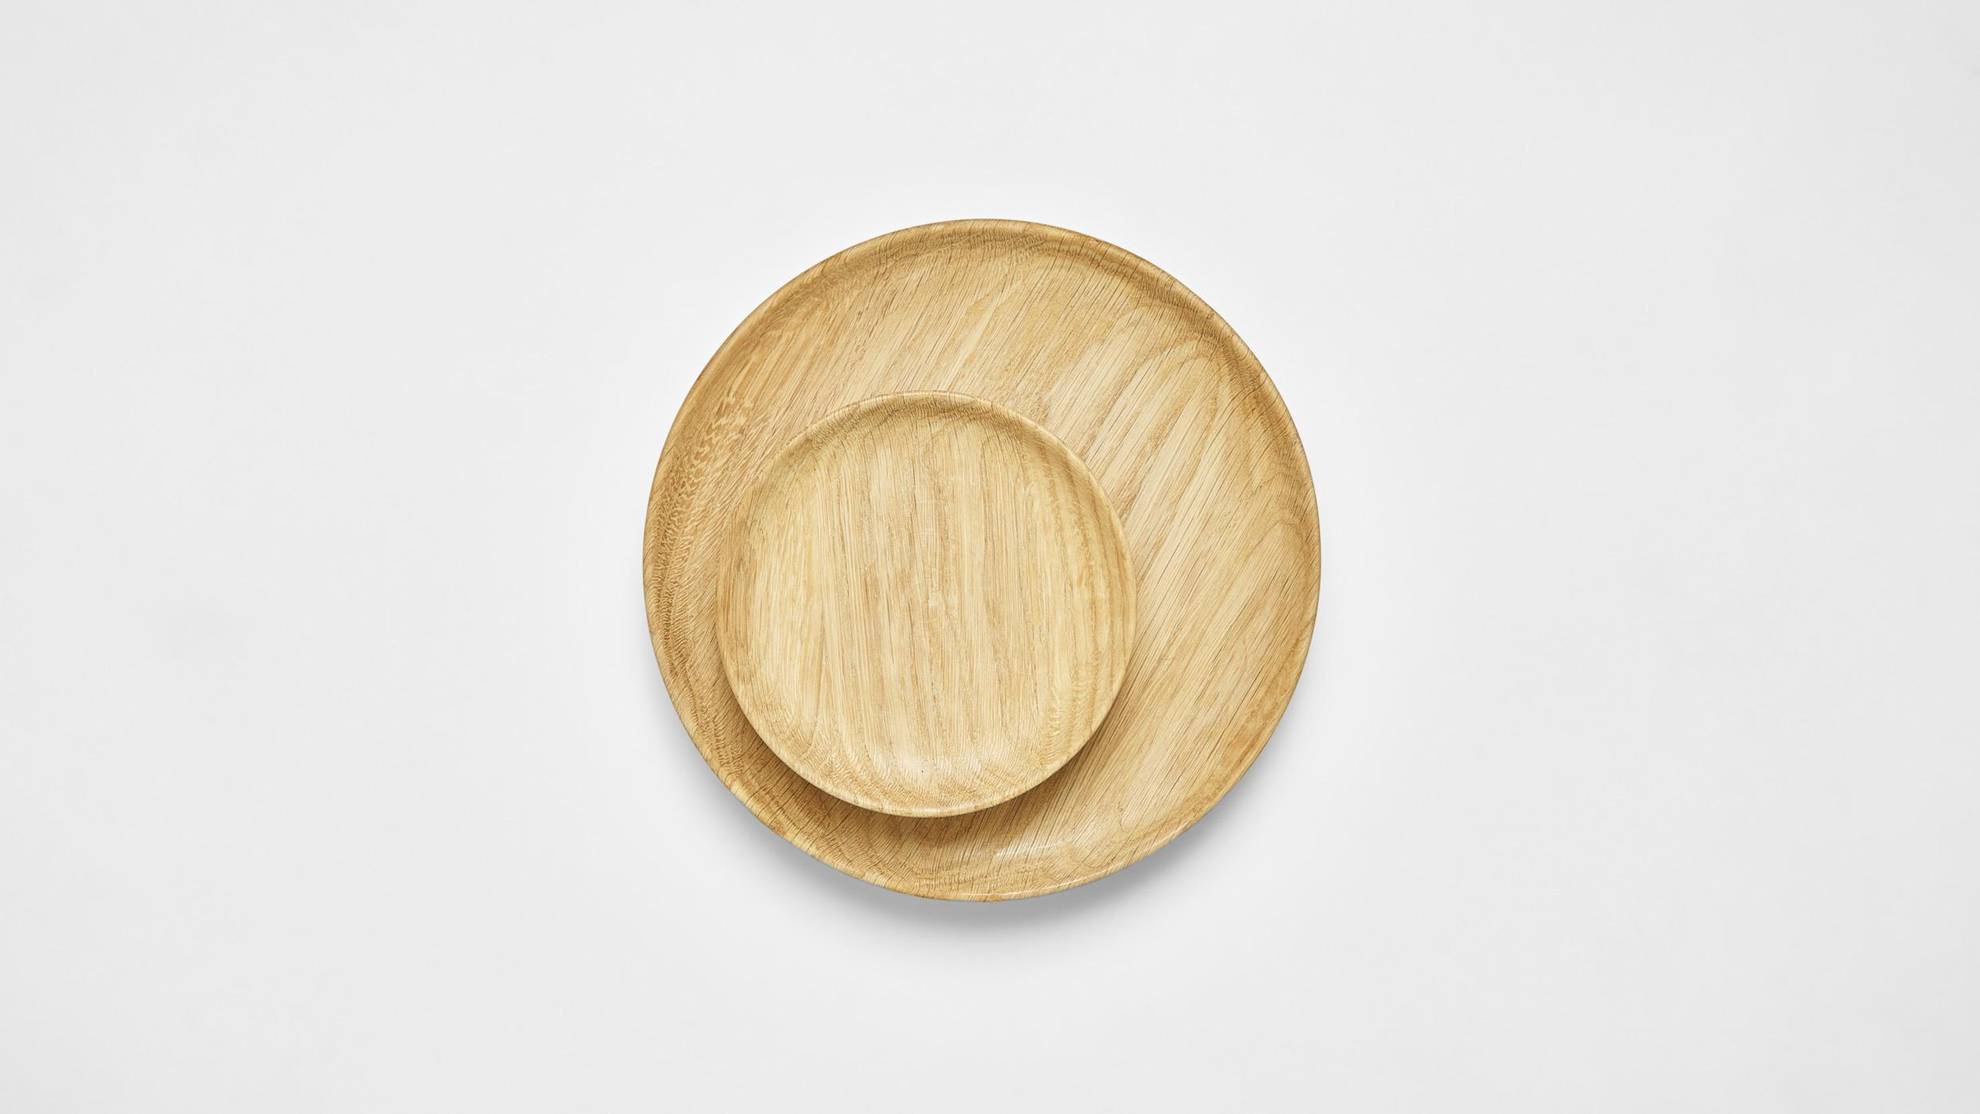 Wooden plates on a white surface.